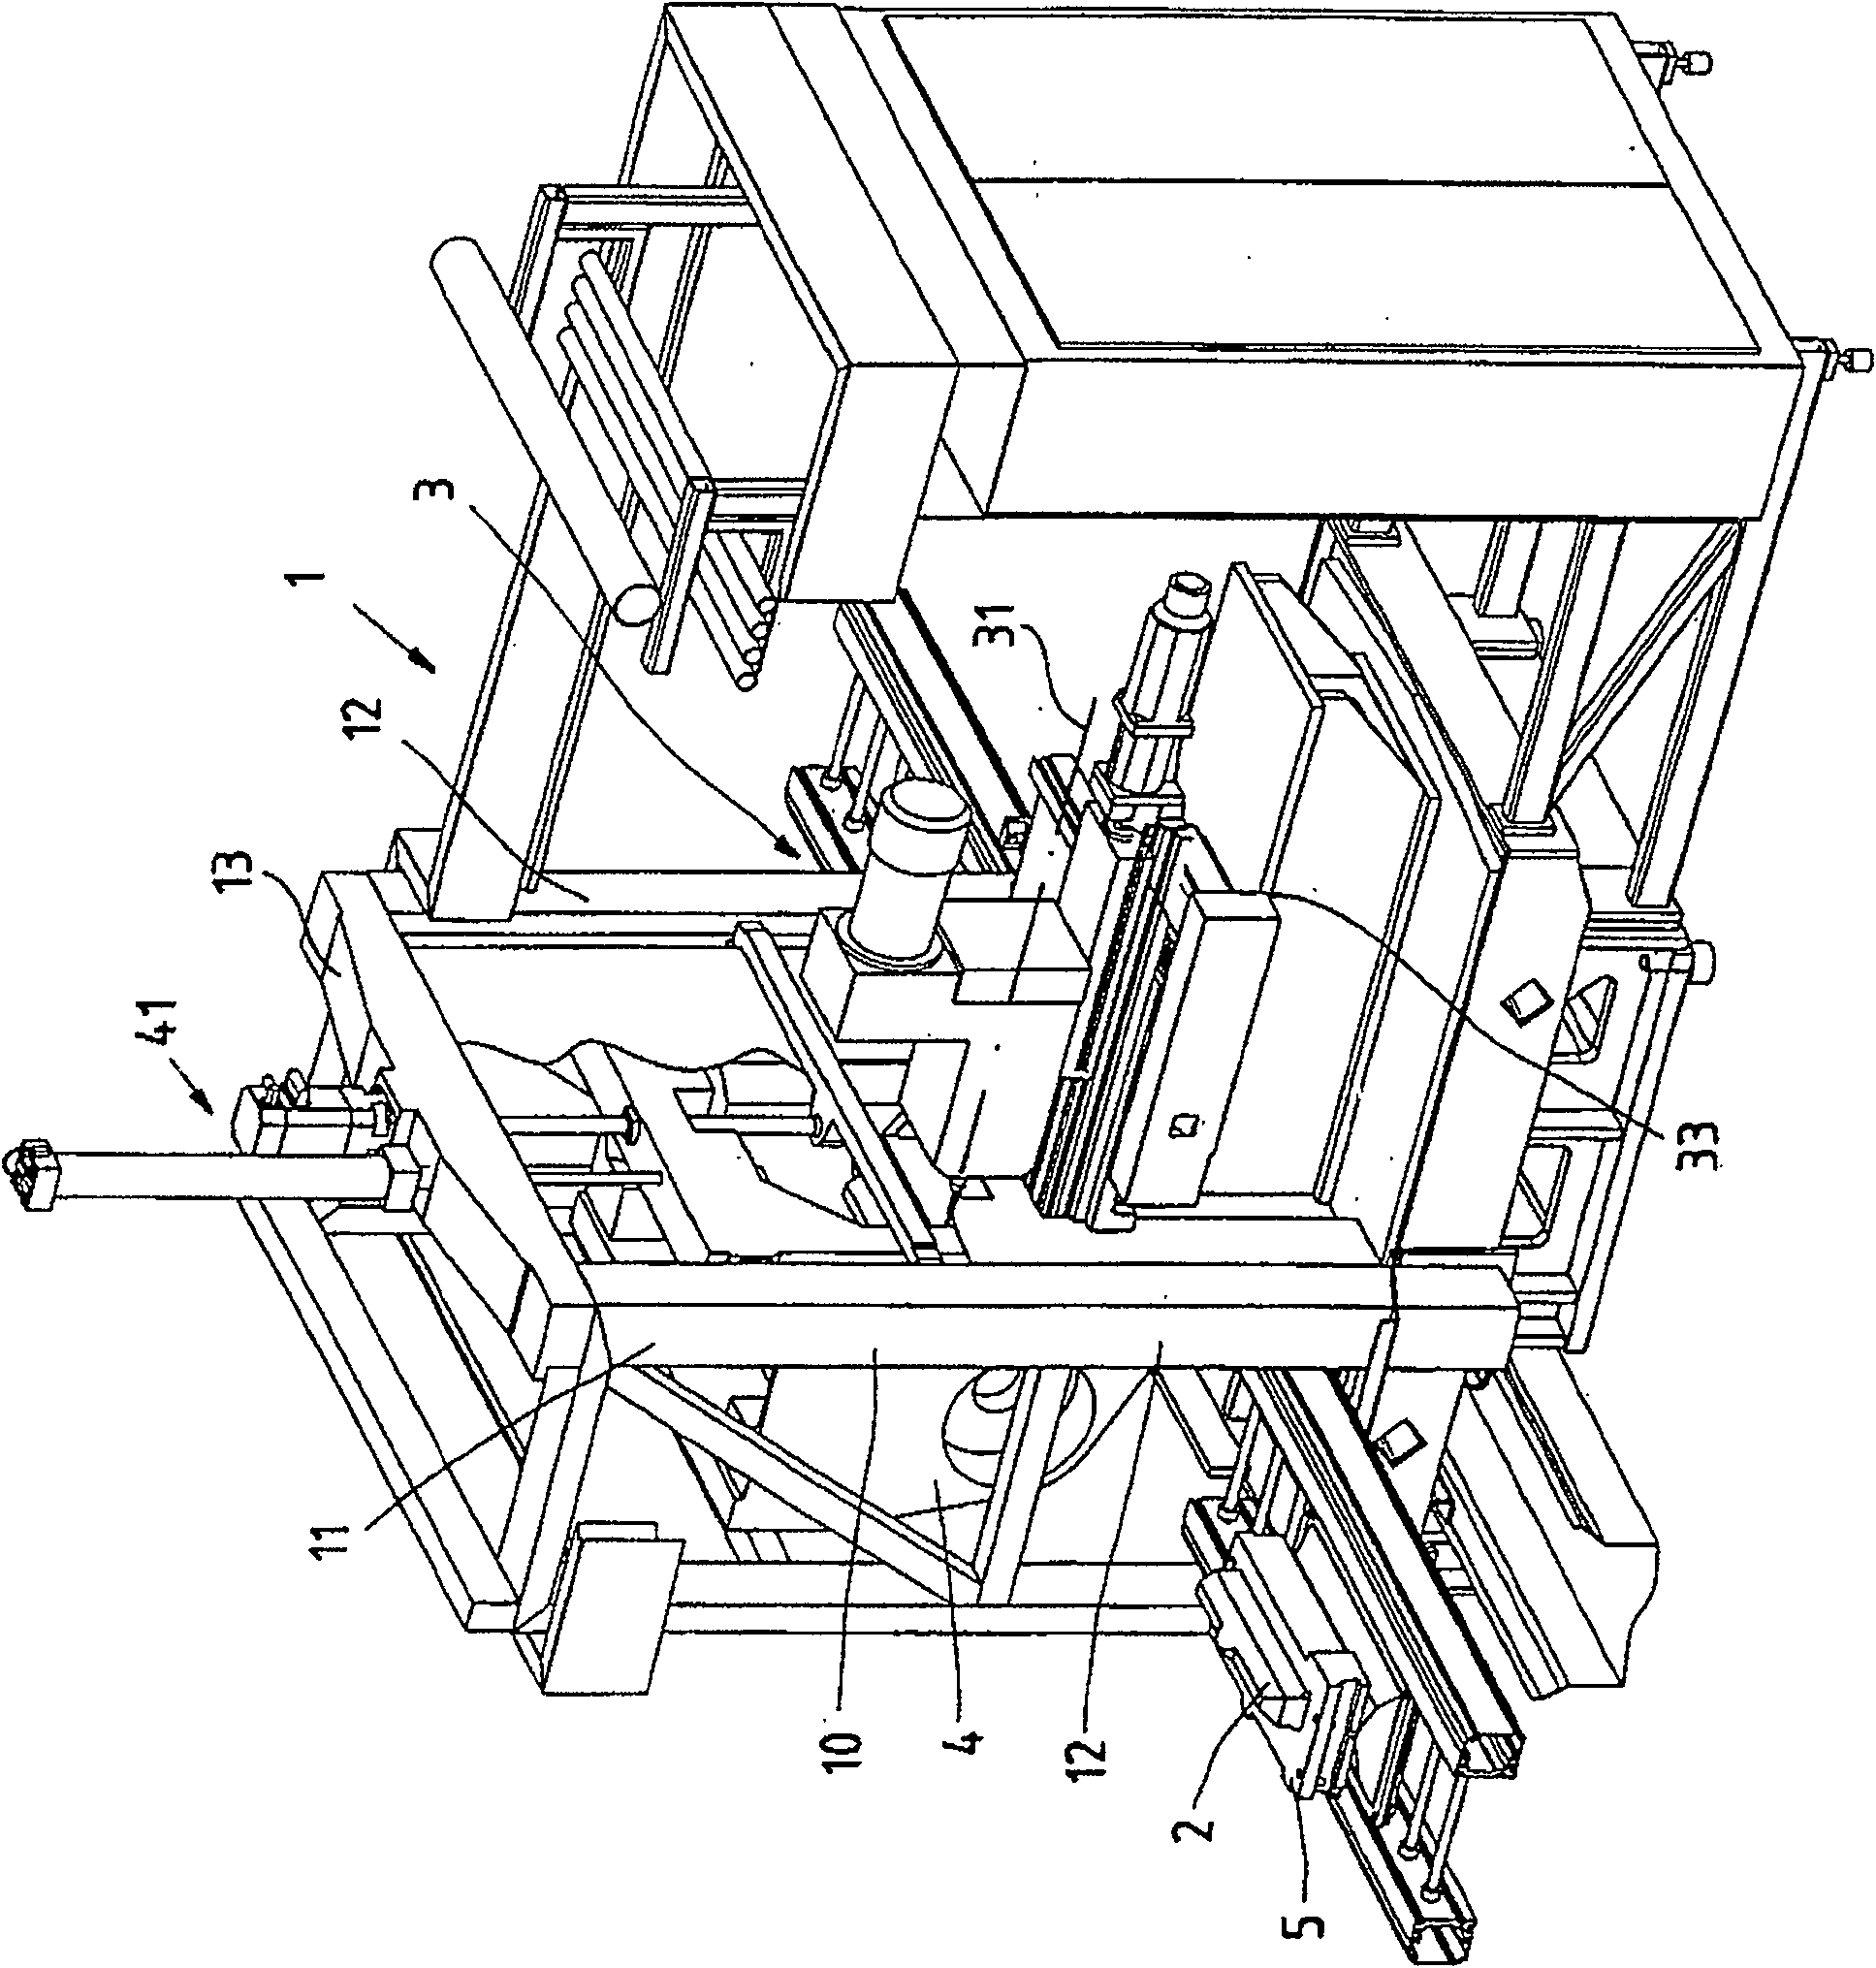 Maching station, maching device and method of positioning workpiece on the maching unit